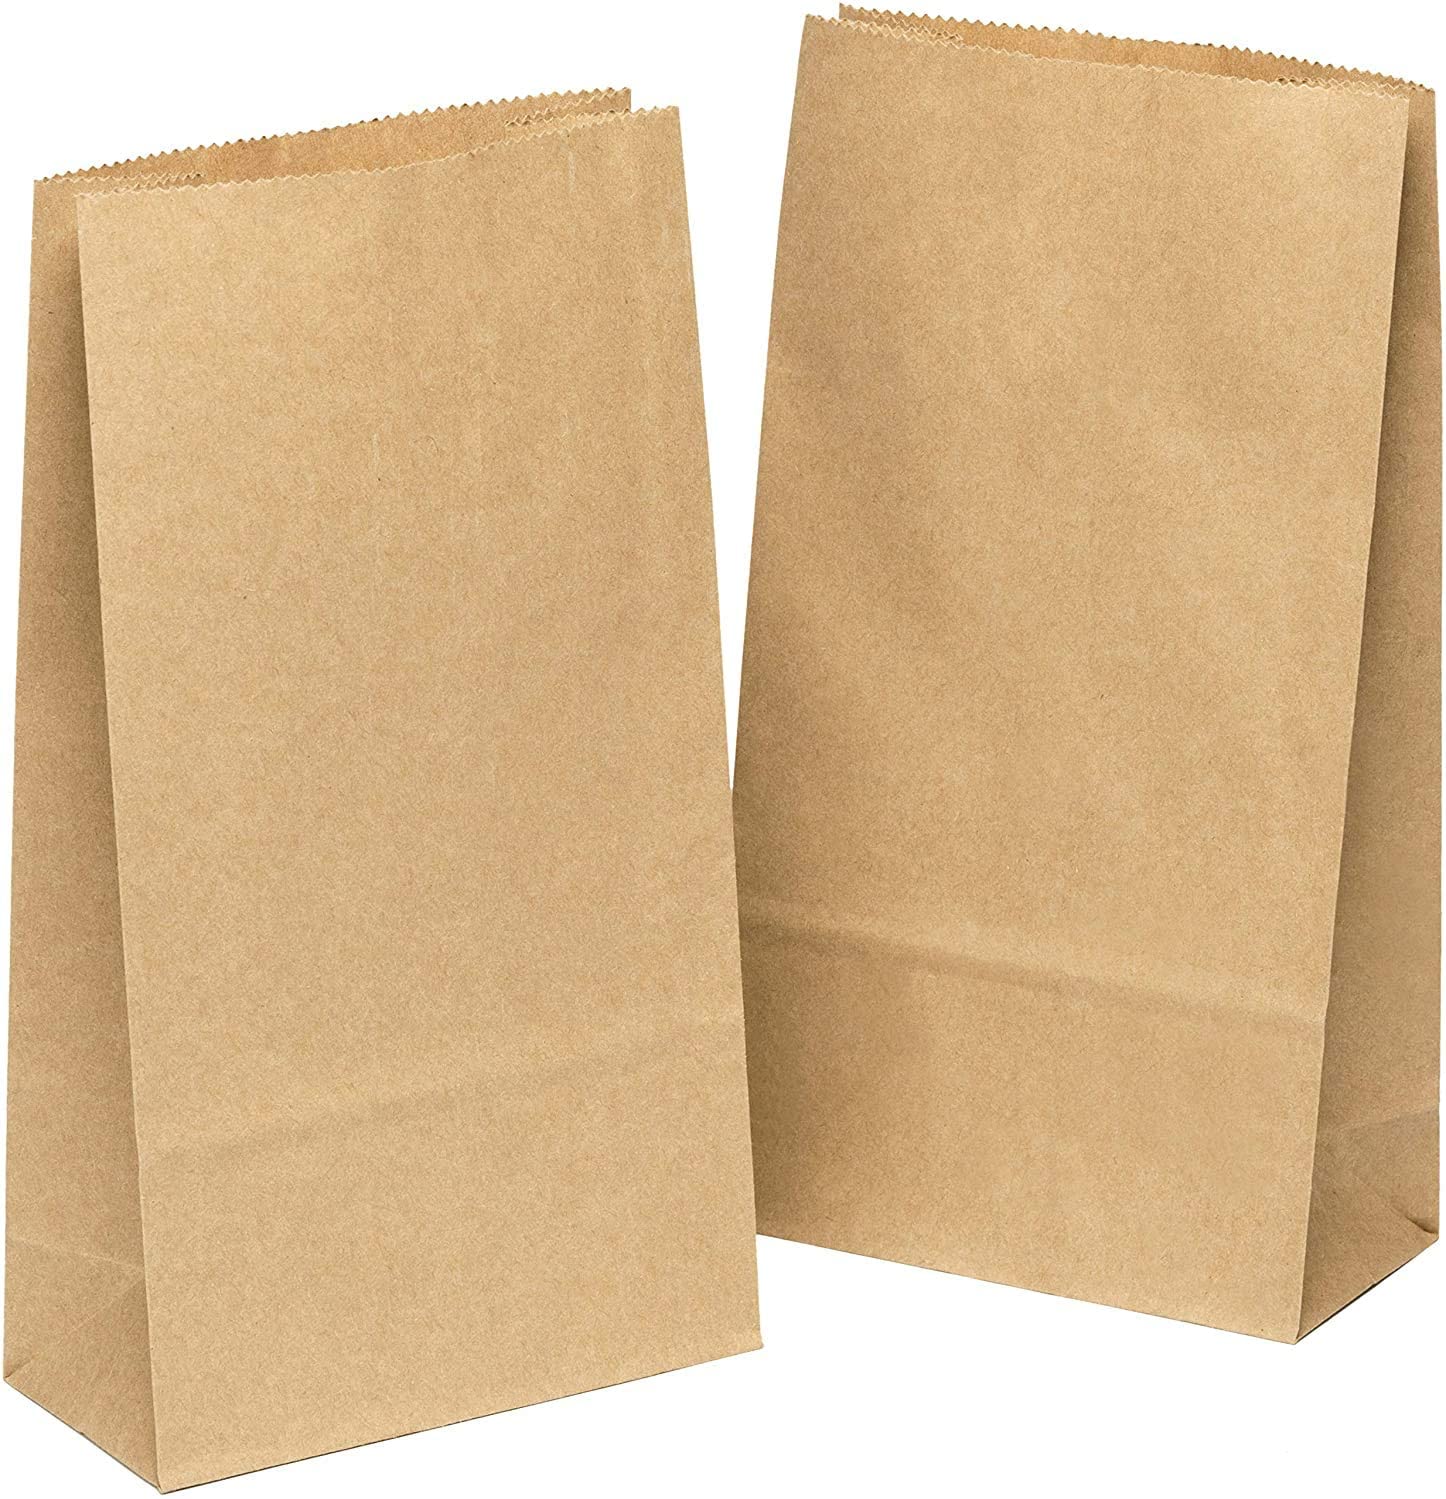 Gift Bags 7 3/4 x 4 13/16 x 16 16 Pound Capacity Recyclable 16 lb Paper Lunch Bags Carry Out Snacks EcoQuality 1000 Brown Kraft Paper Bag Party Bags,to Go Grocery Small Merchandise 